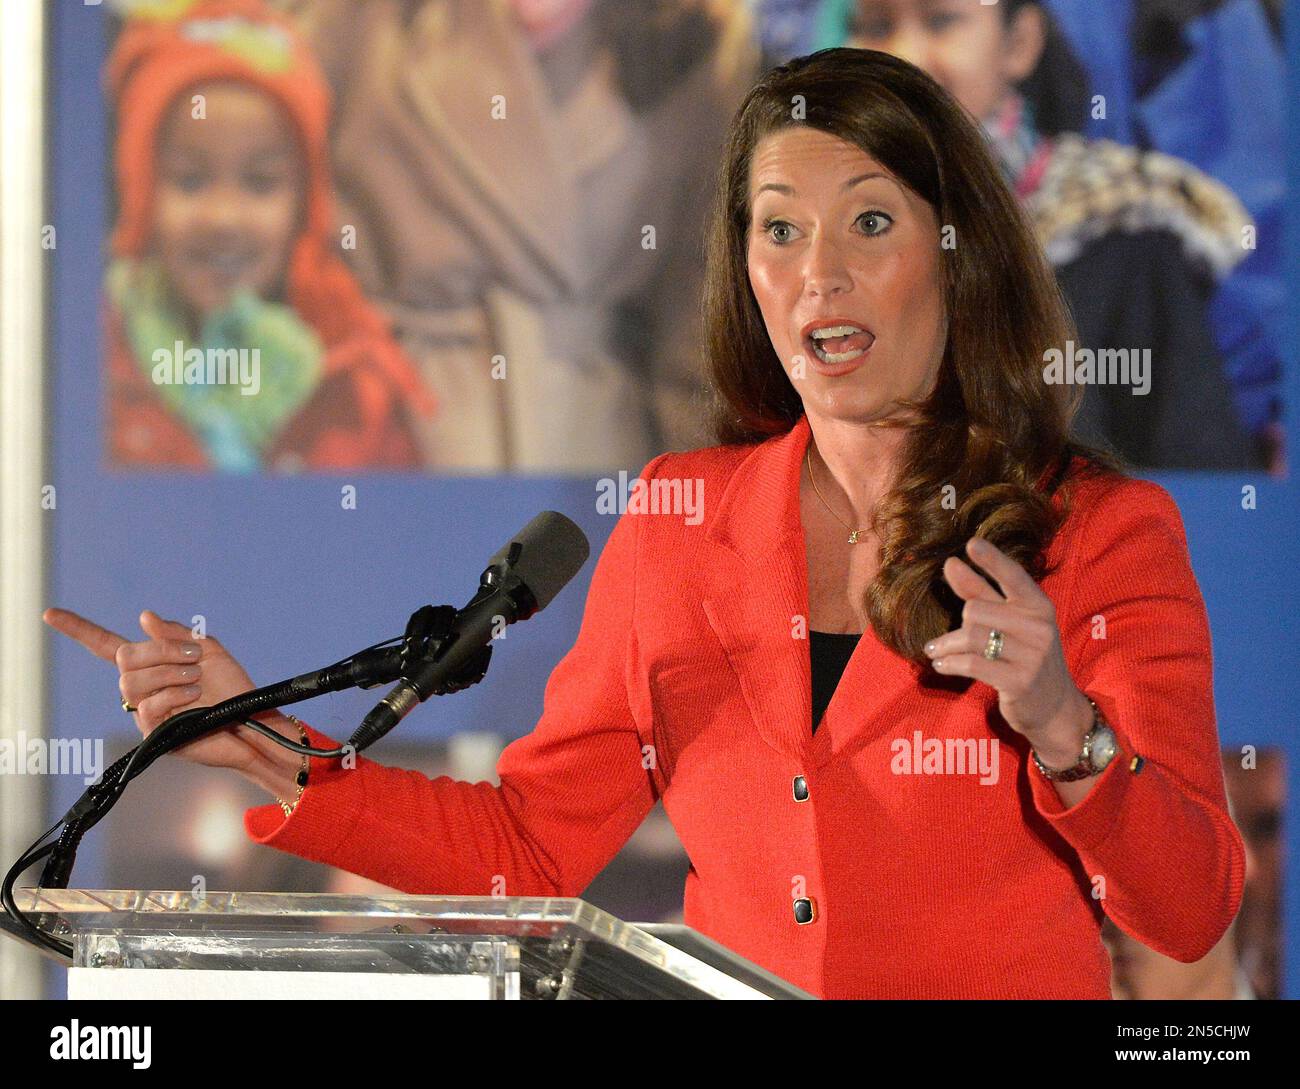 Democratic Senate challenger Alison Lundergan Grimes addresses a group of supporters at a fundraiser at the Galt House Hotel, Tuesday, Feb. 25, 2014, in Louisville, Ky. (AP Photo/Timothy D. Easley) Stock Photo